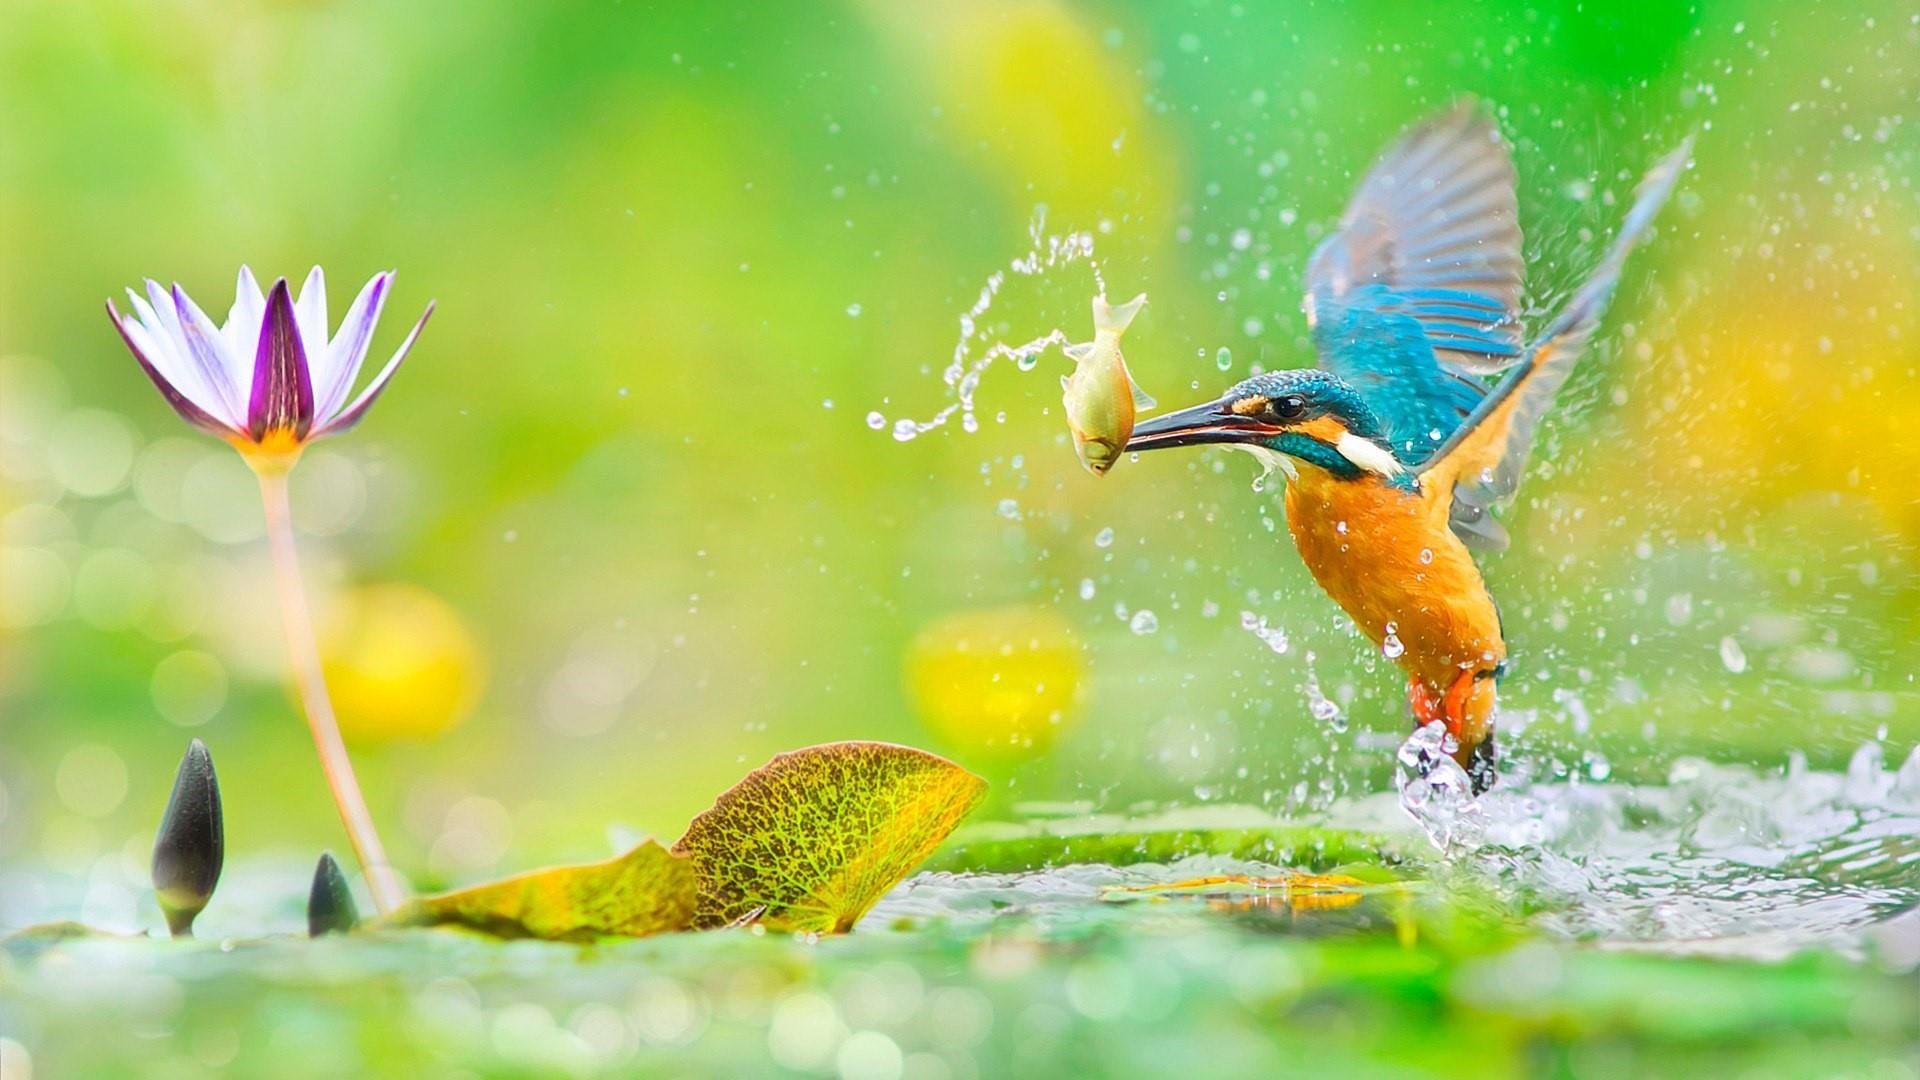 Kingfisher wallpapers, High-quality backgrounds, Birds, Vibrant colors, 1920x1080 Full HD Desktop